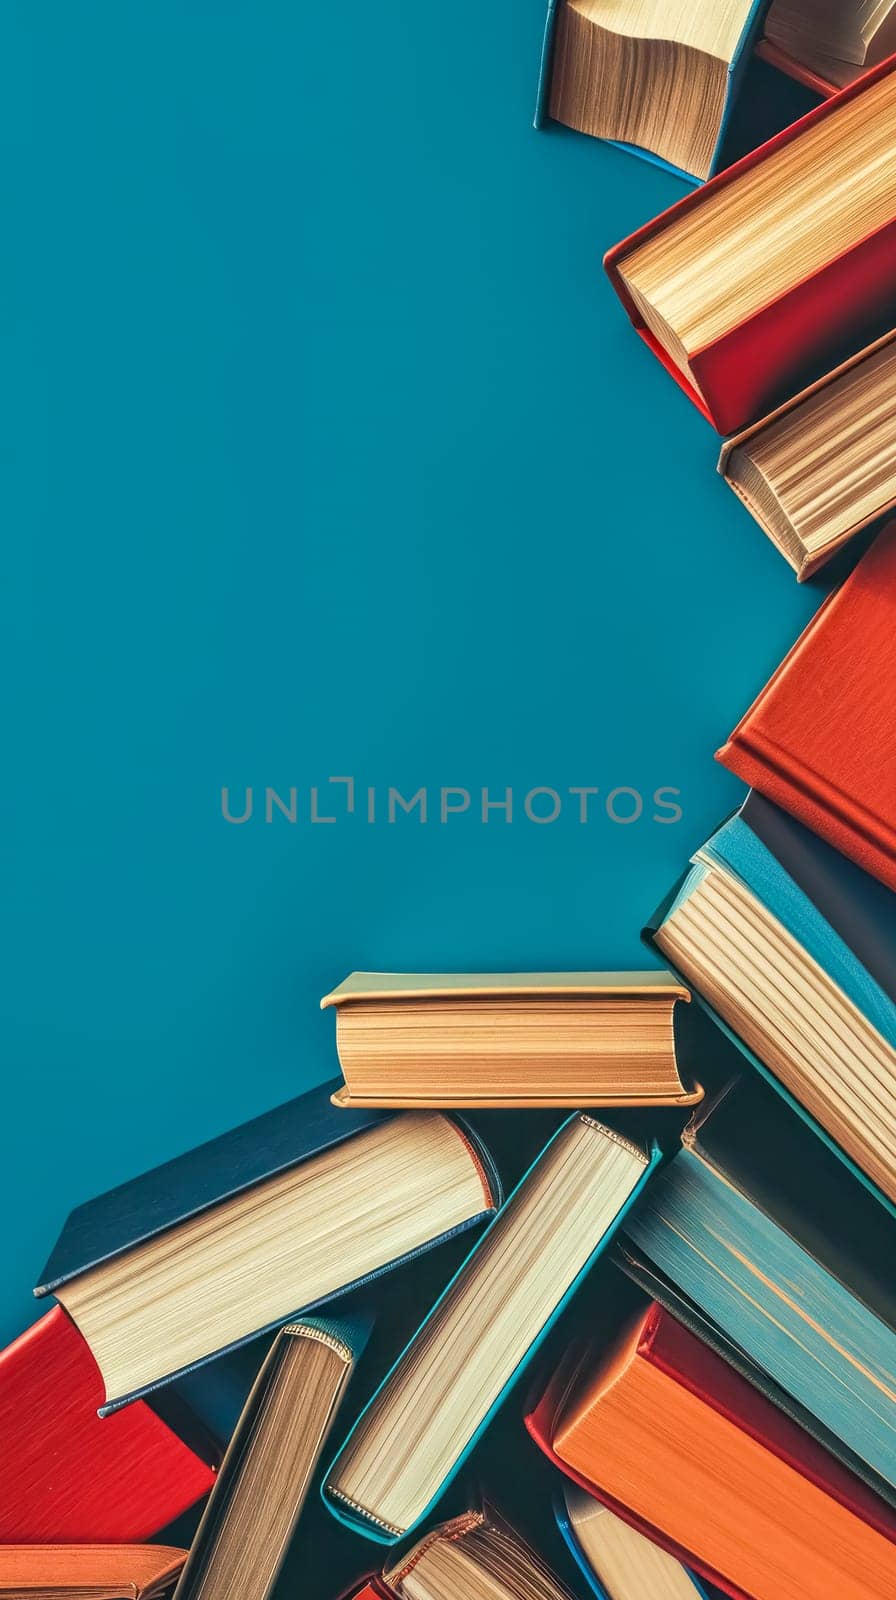 Hardcover books with colorful spines stacked against a teal background, a celebration of literature. by Edophoto